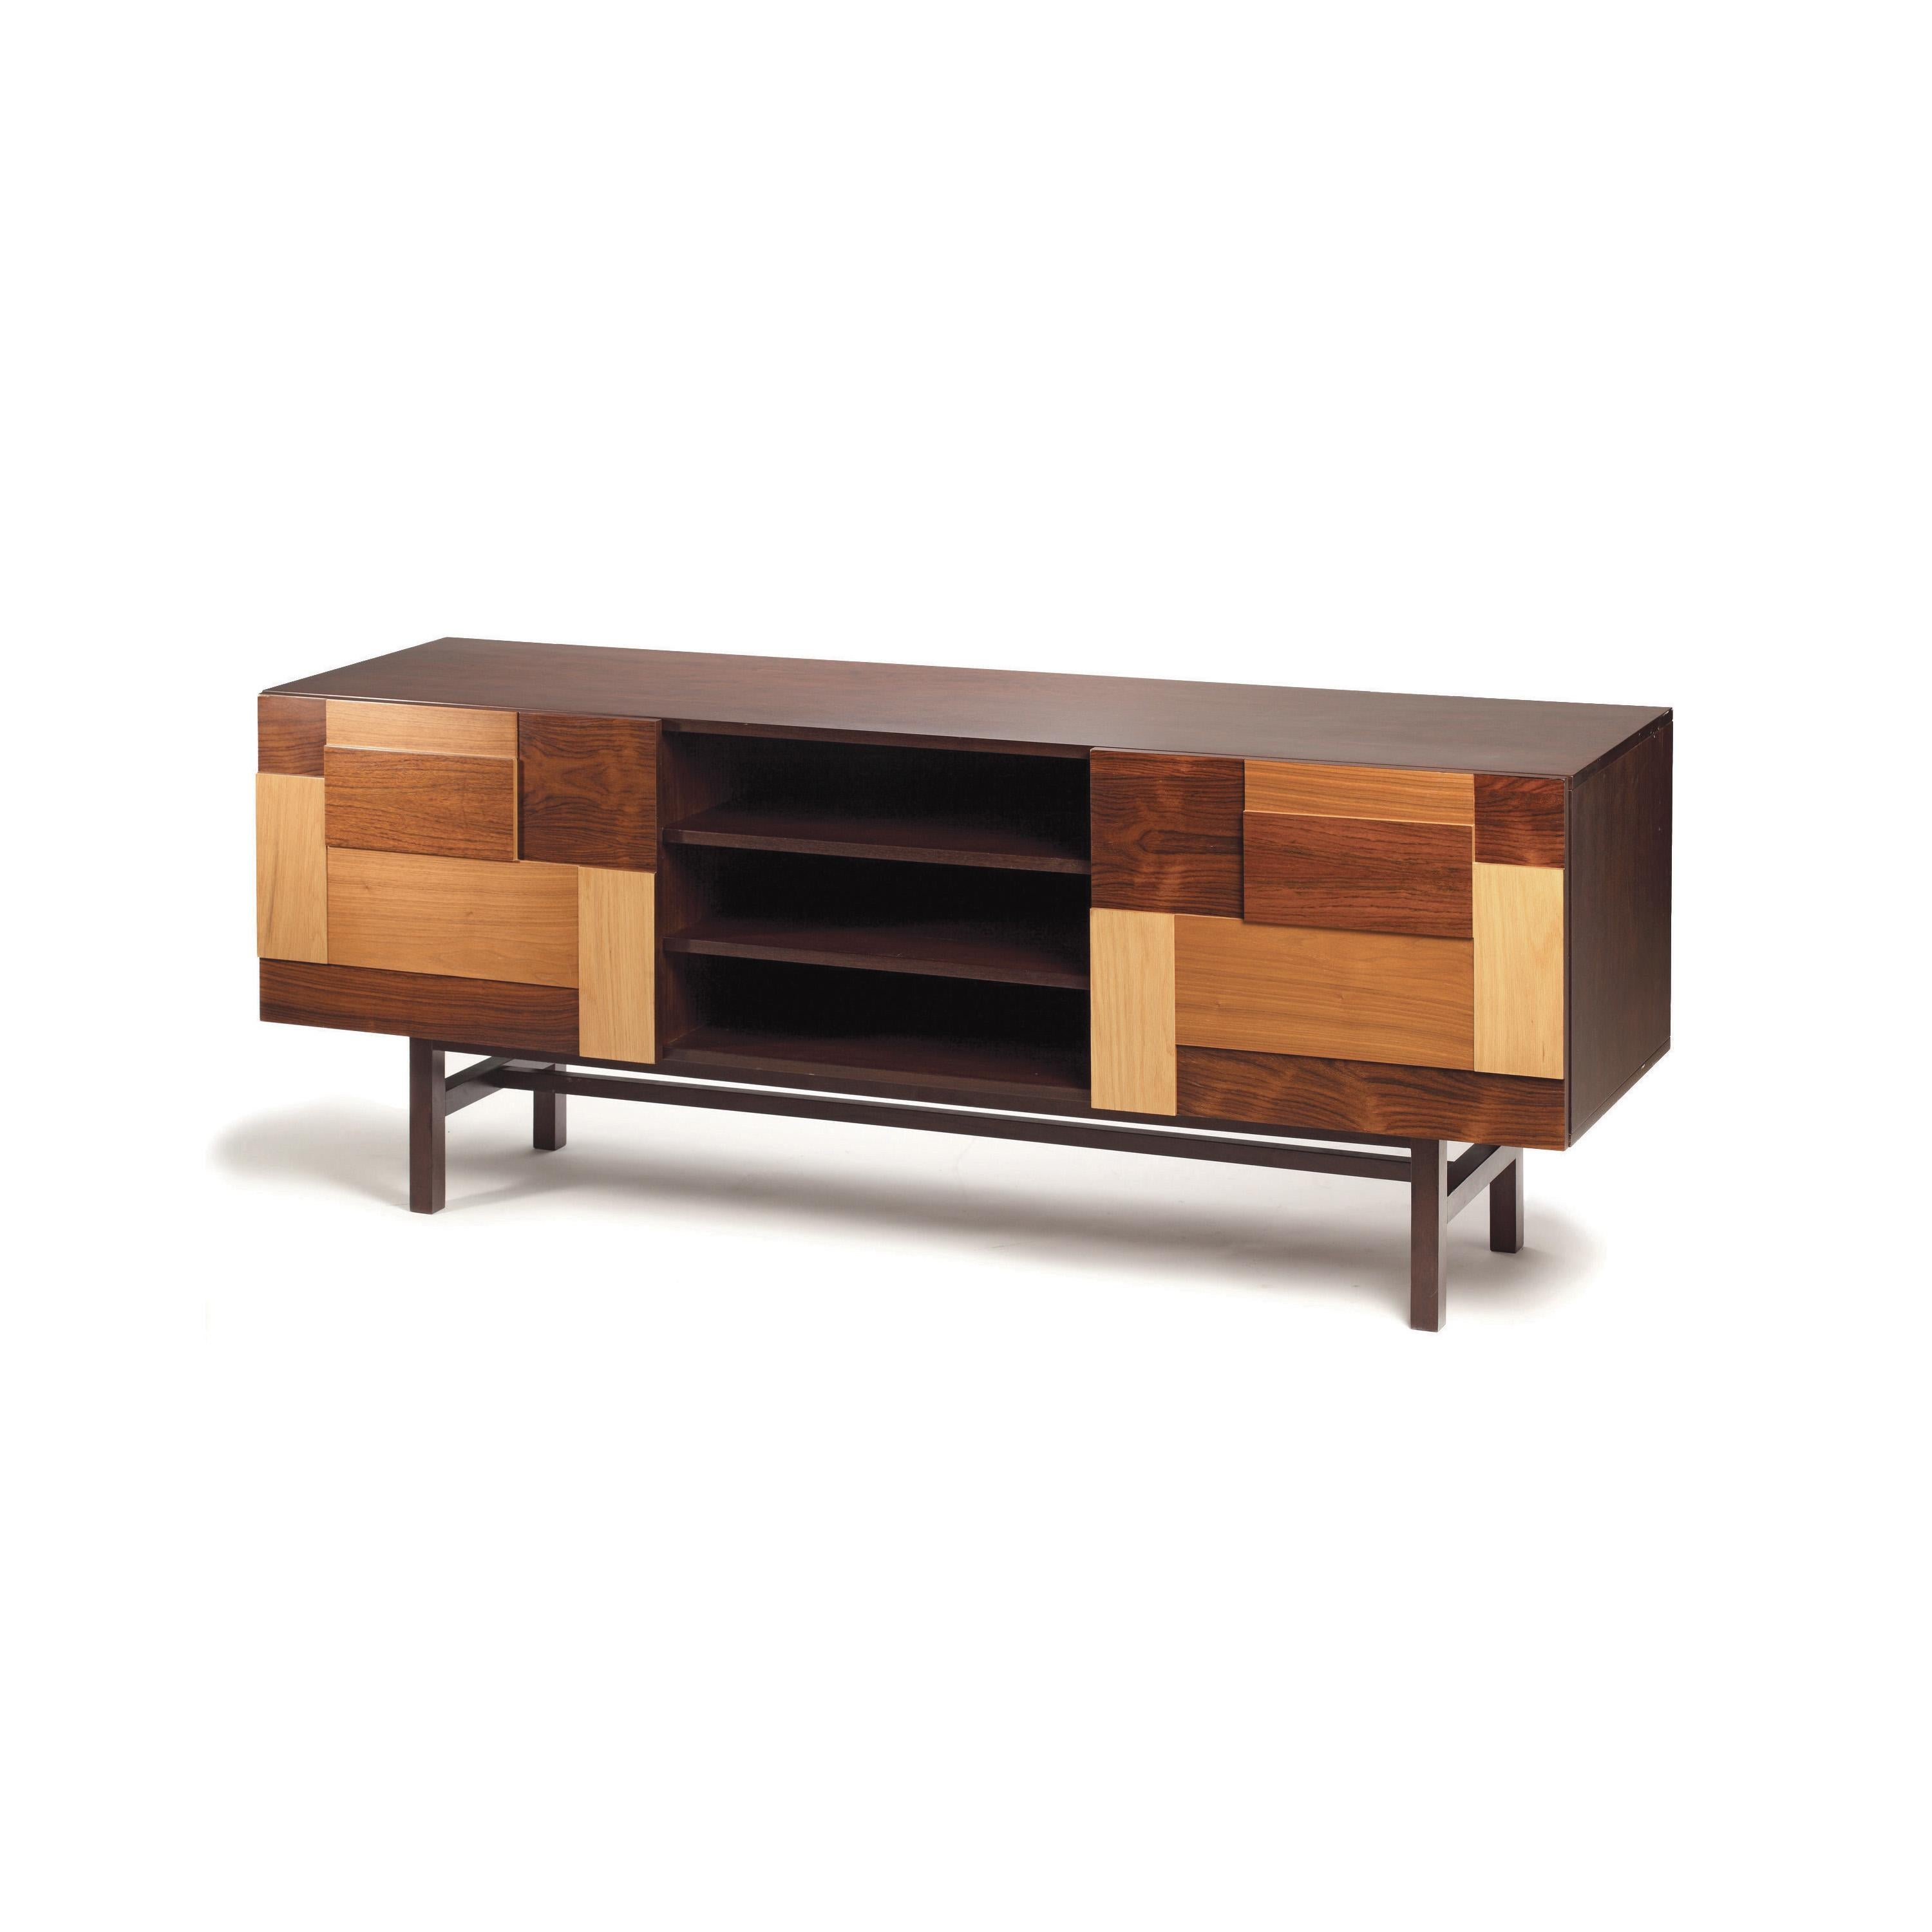 Form sideboard is a high quality product by Mambo Unlimited Ideas, crafted in polished or matte wood veneer structure and feet, combining natural oak, natural walnut, dark walnut and iron wood, brass applications. It features three dimensional